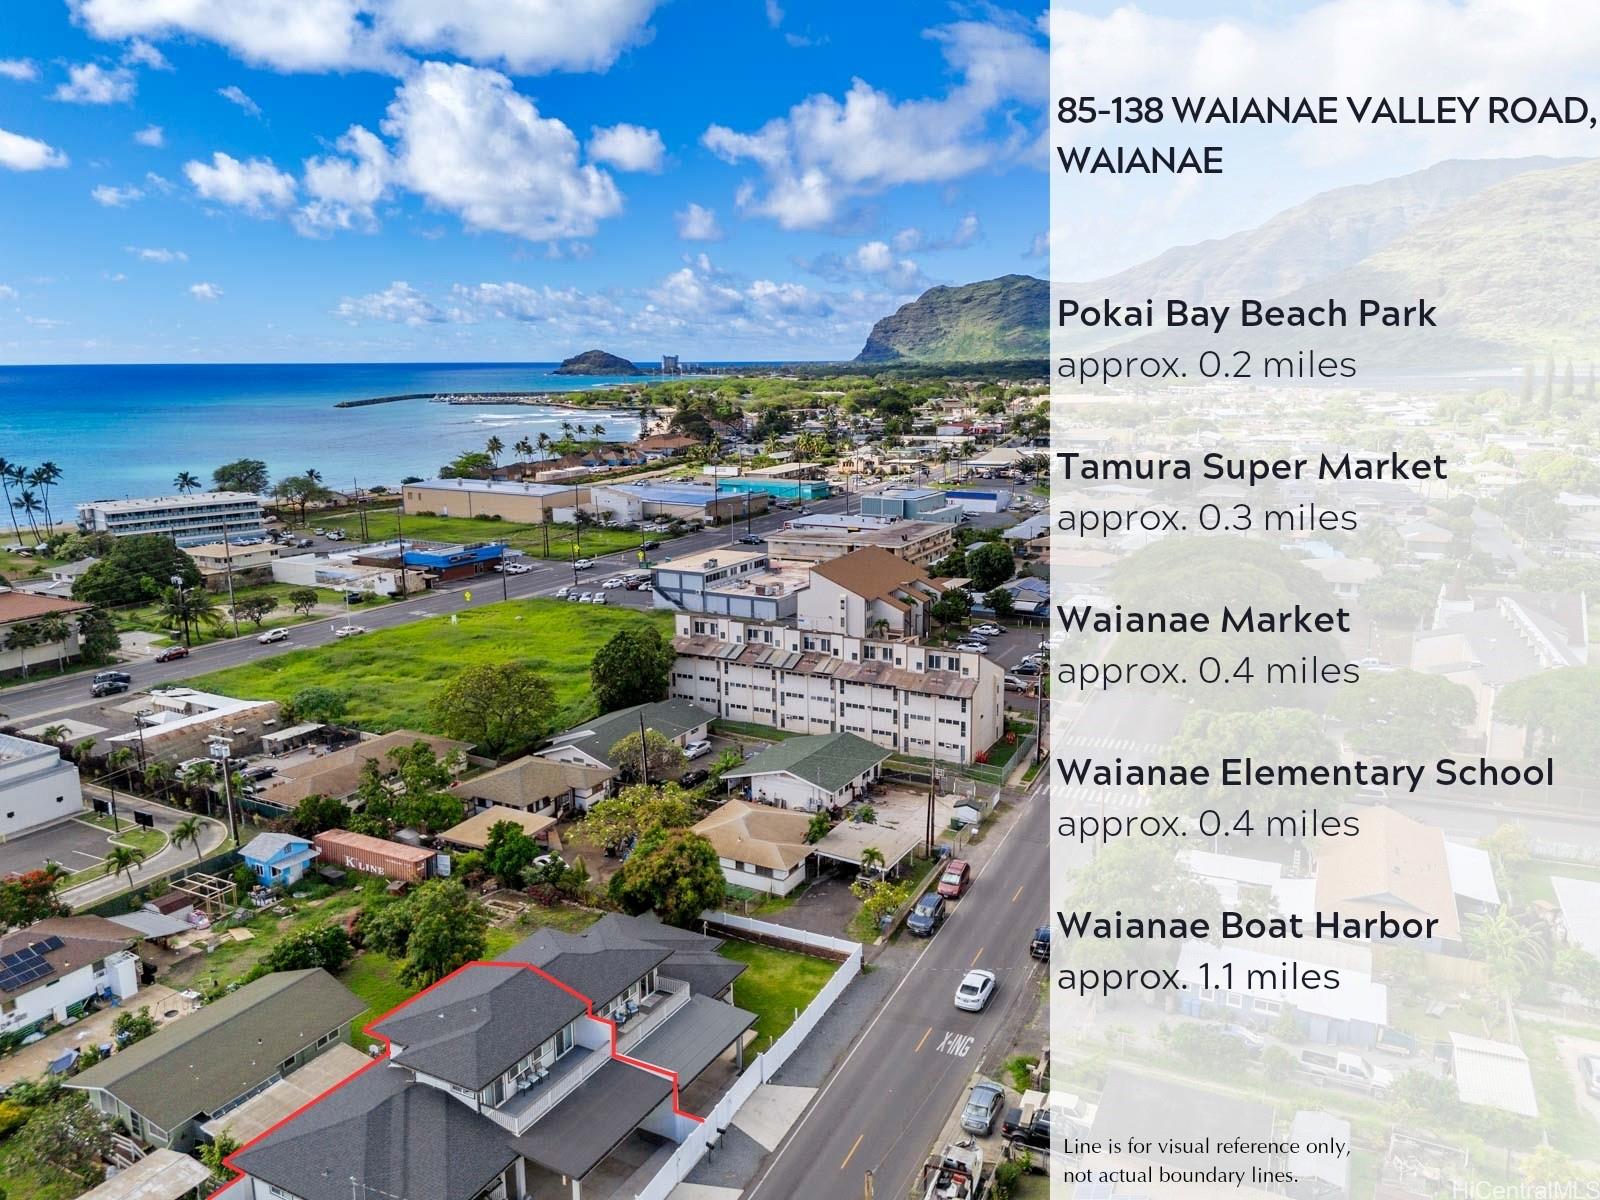 85-138 Waianae Valley Road